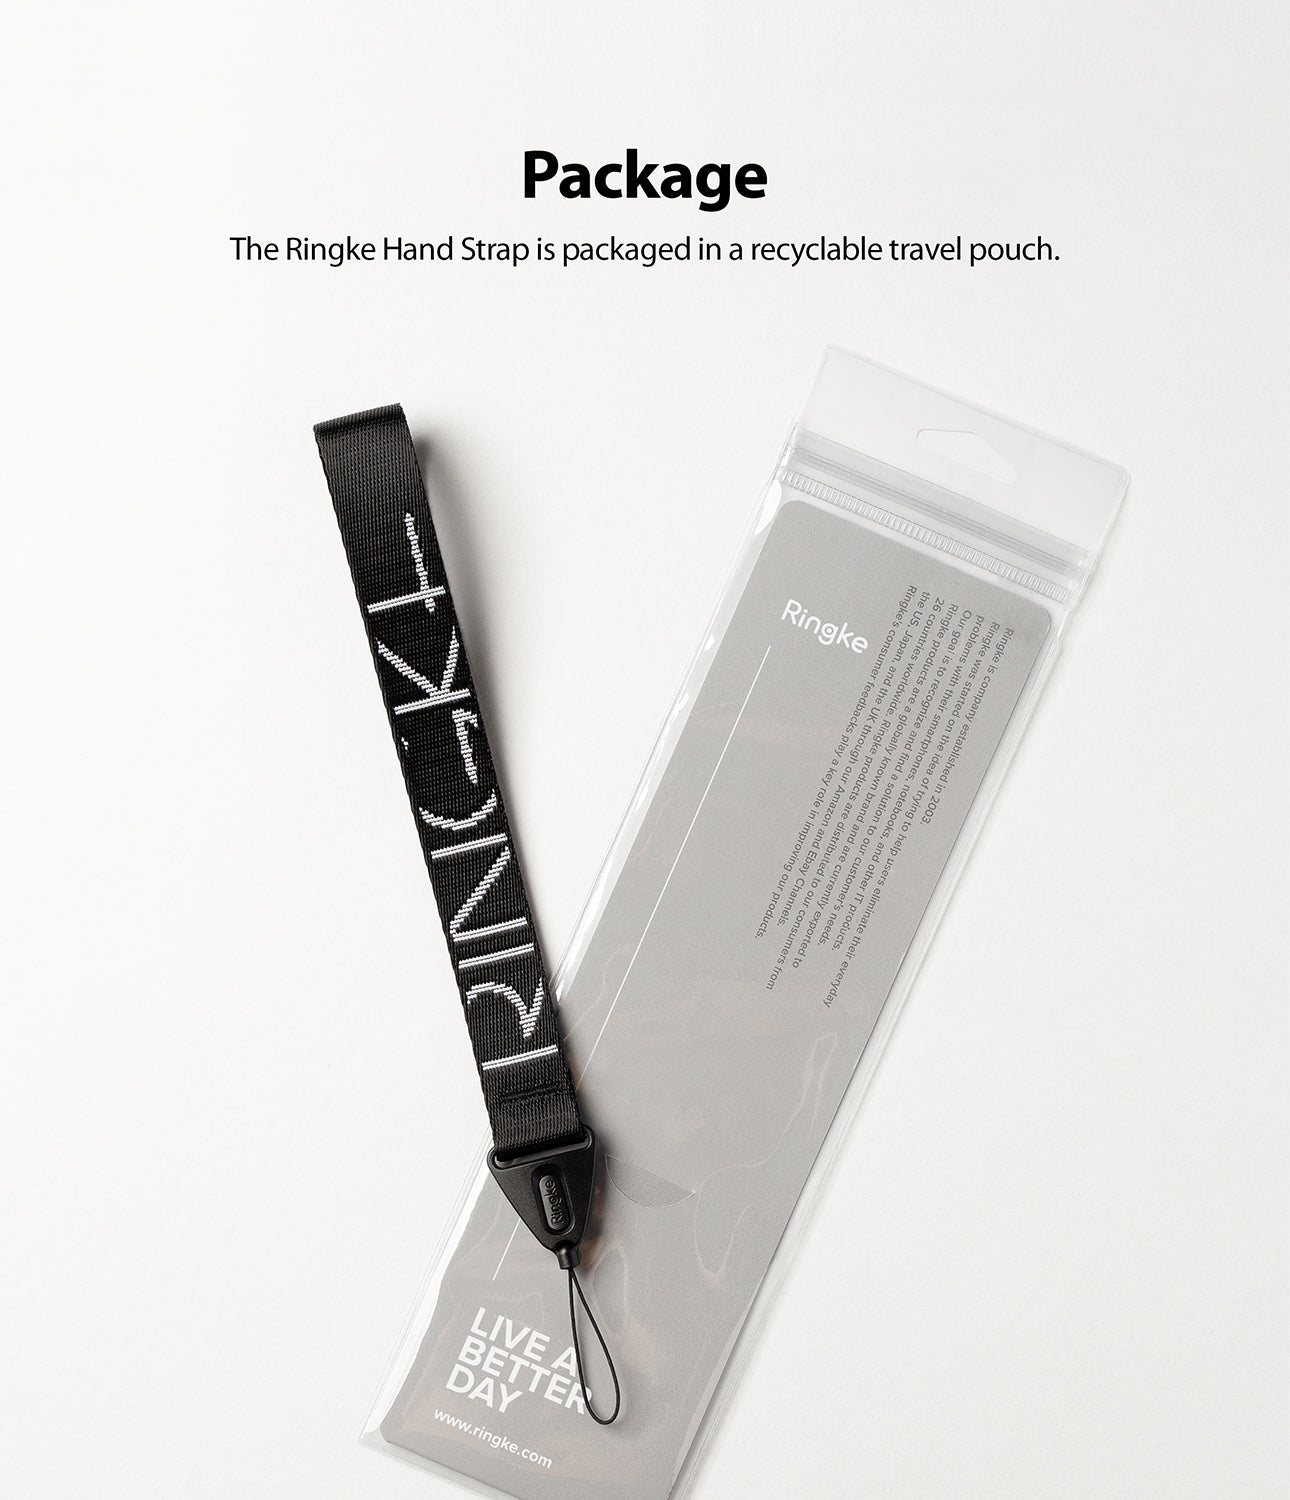 packaged in a recyclable travel pouch